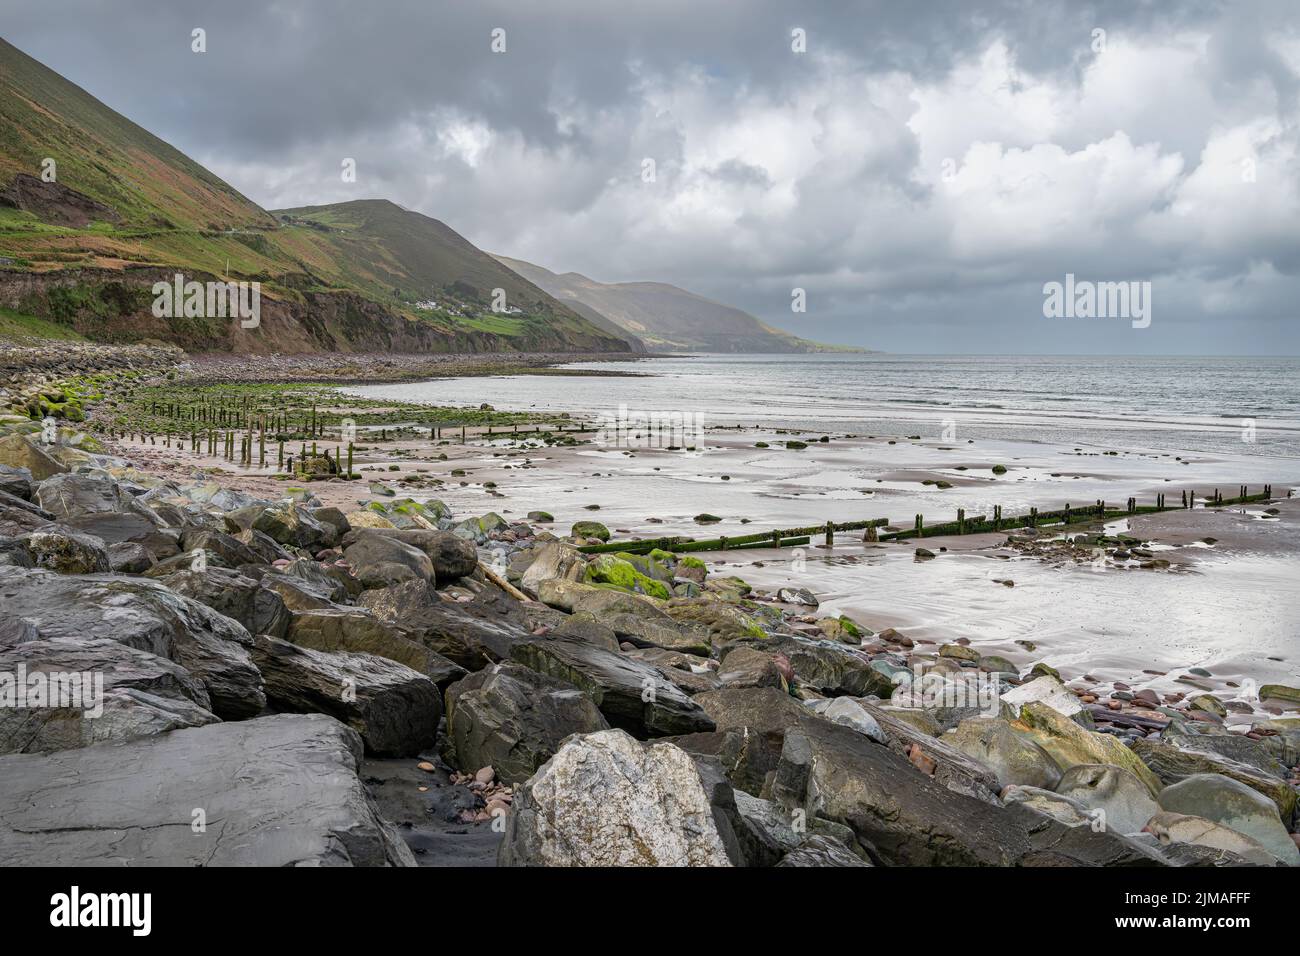 Rossbeigh - Rossbehy sand spit  Beach (looking south) on the Iveragh Peninsula in County Kerry, Ireland Stock Photo